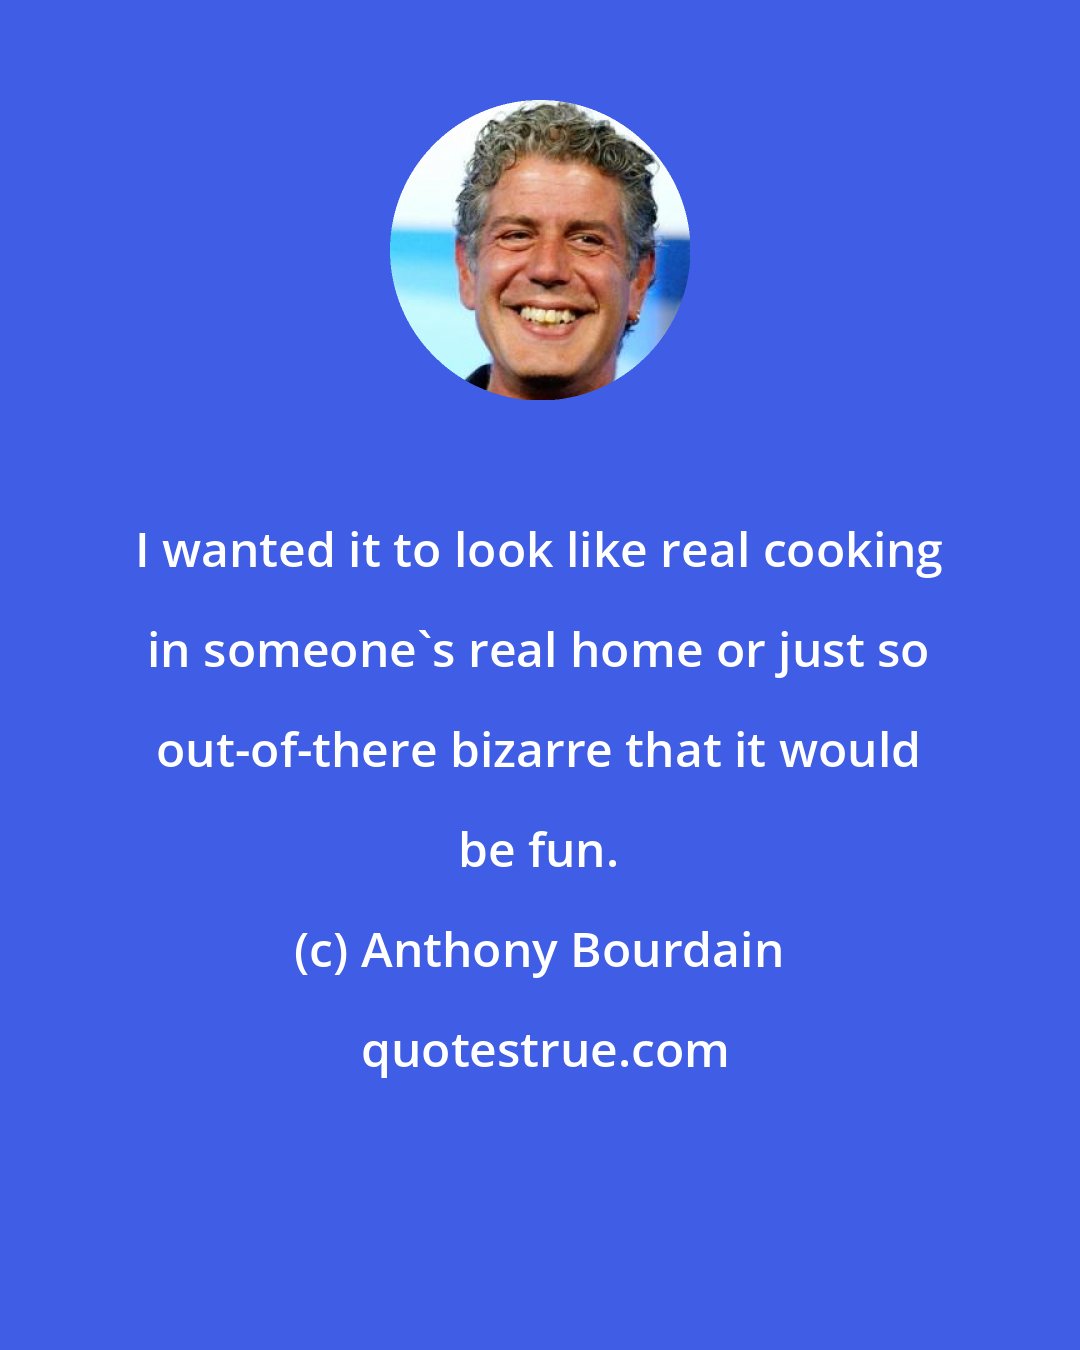 Anthony Bourdain: I wanted it to look like real cooking in someone's real home or just so out-of-there bizarre that it would be fun.